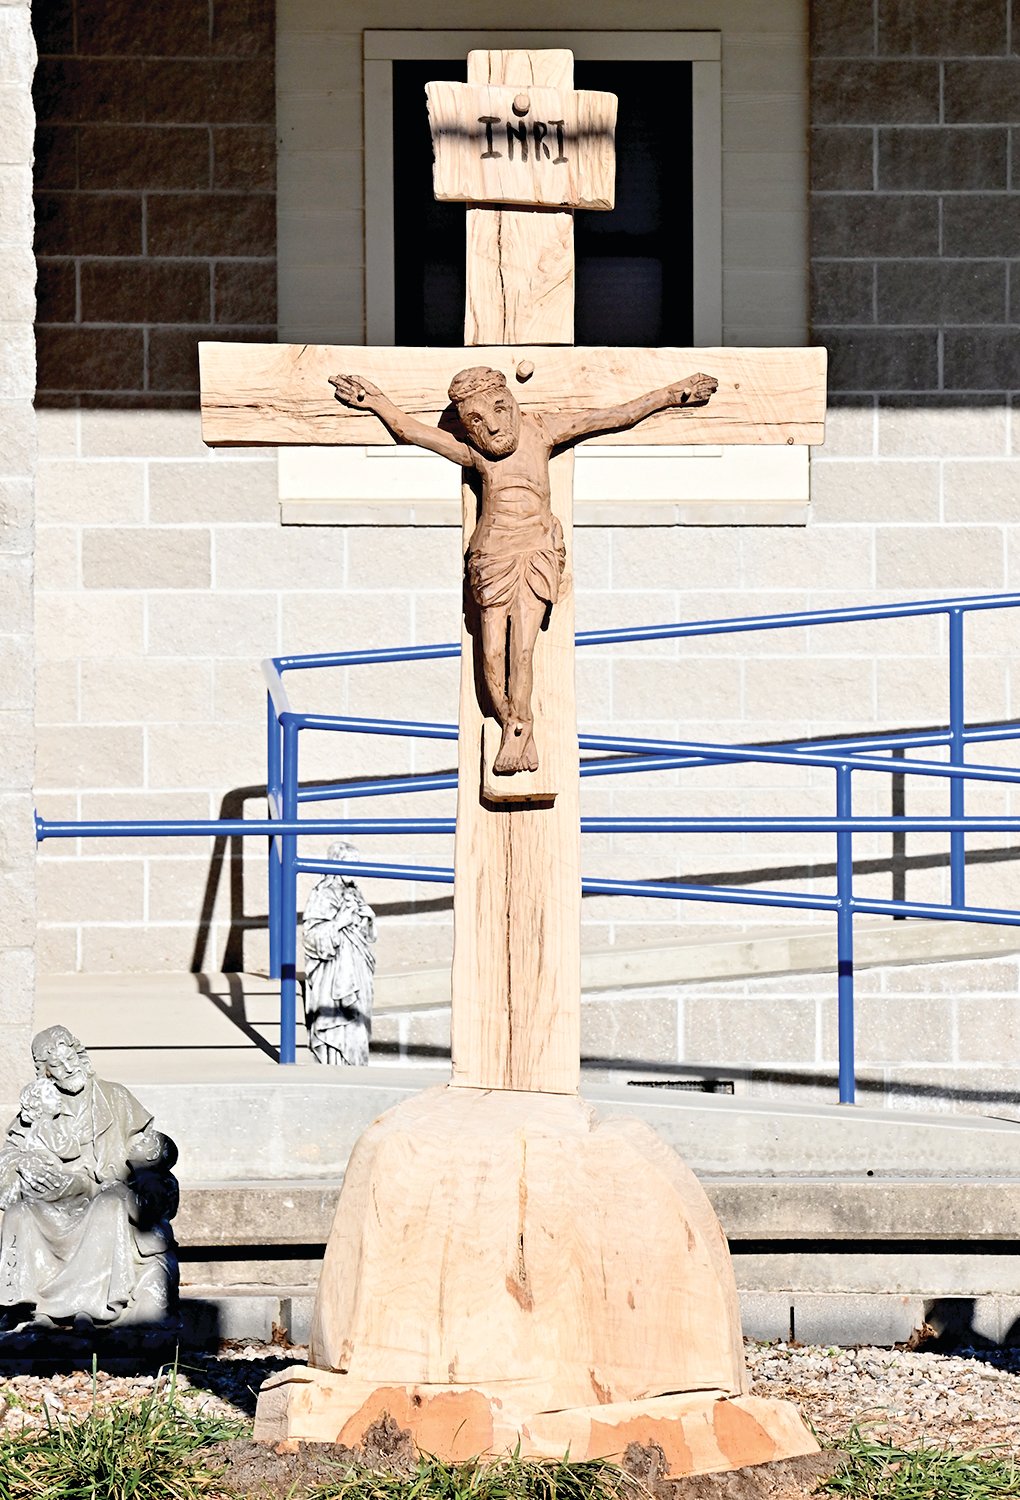 Part of the old tree has been carved into a crucifix. “It’s the Easter story retold. Great beauty has come out of something that has died,” said Lisa Grellner, principal of St. George School.